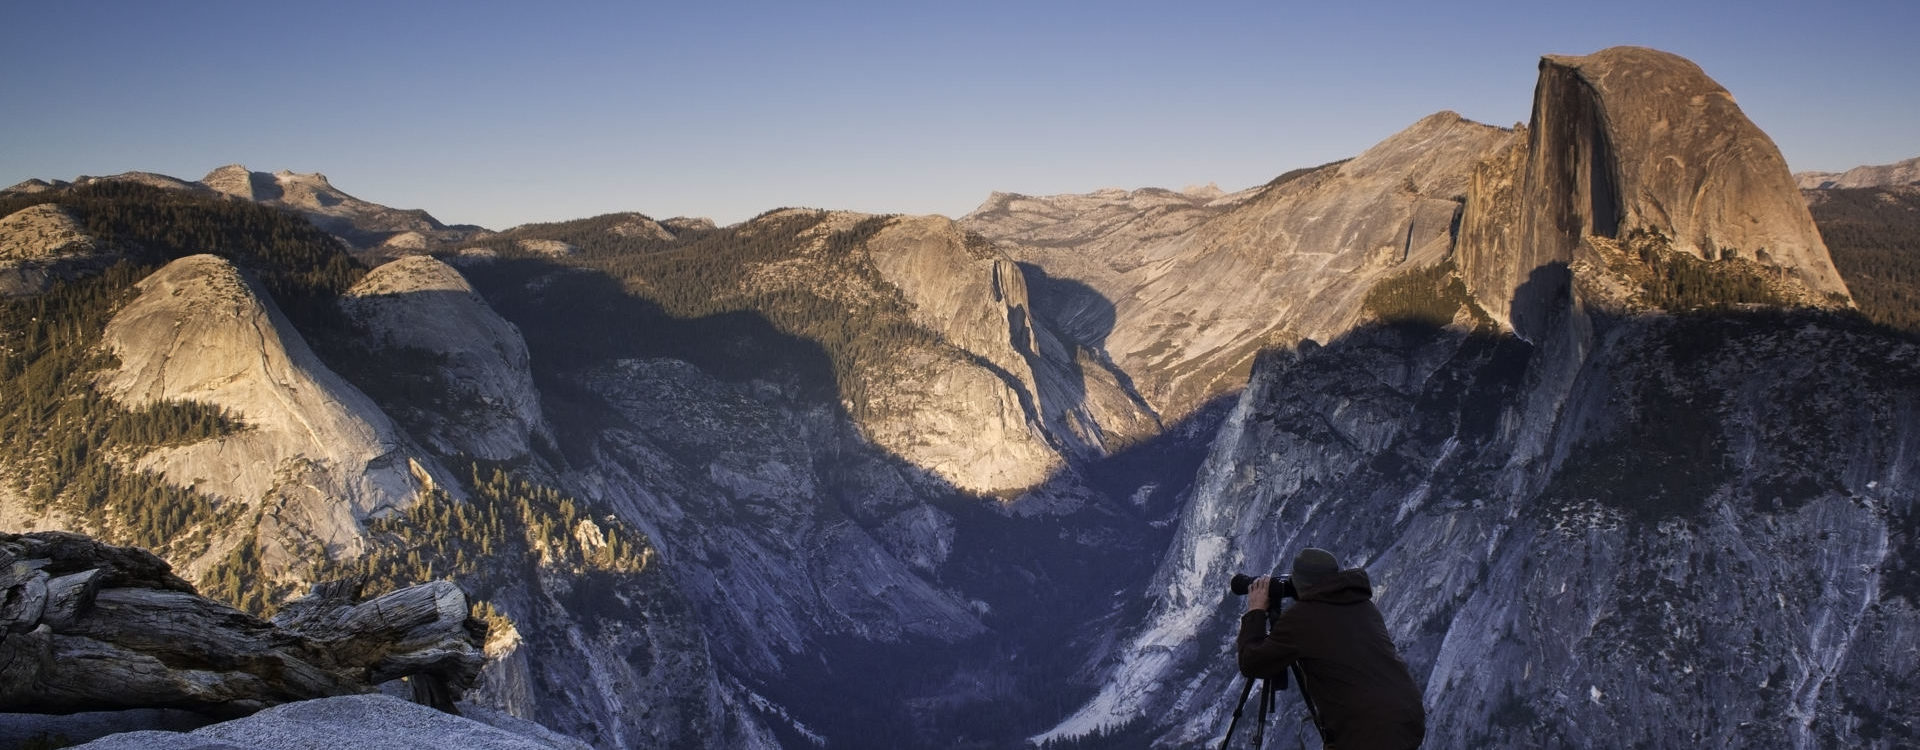 Photographer Shooting at Glacier Point in Yosemite